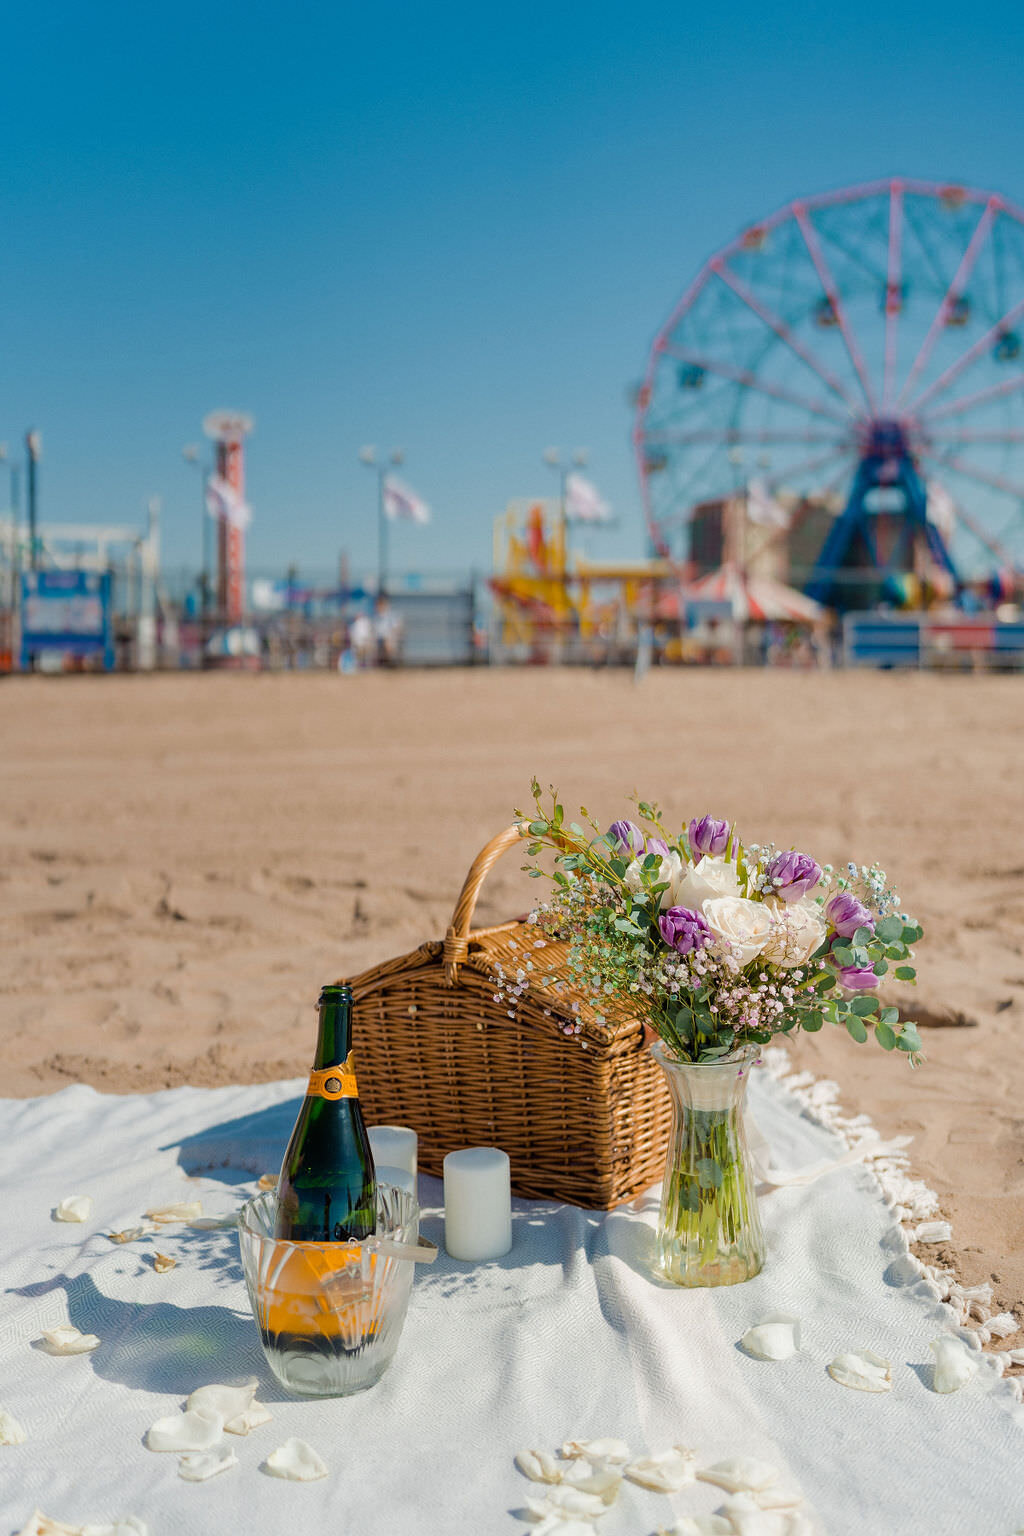 flowers, a champagne bottle chilling, candles, and a picnic basket laid out on a blanket in the sand